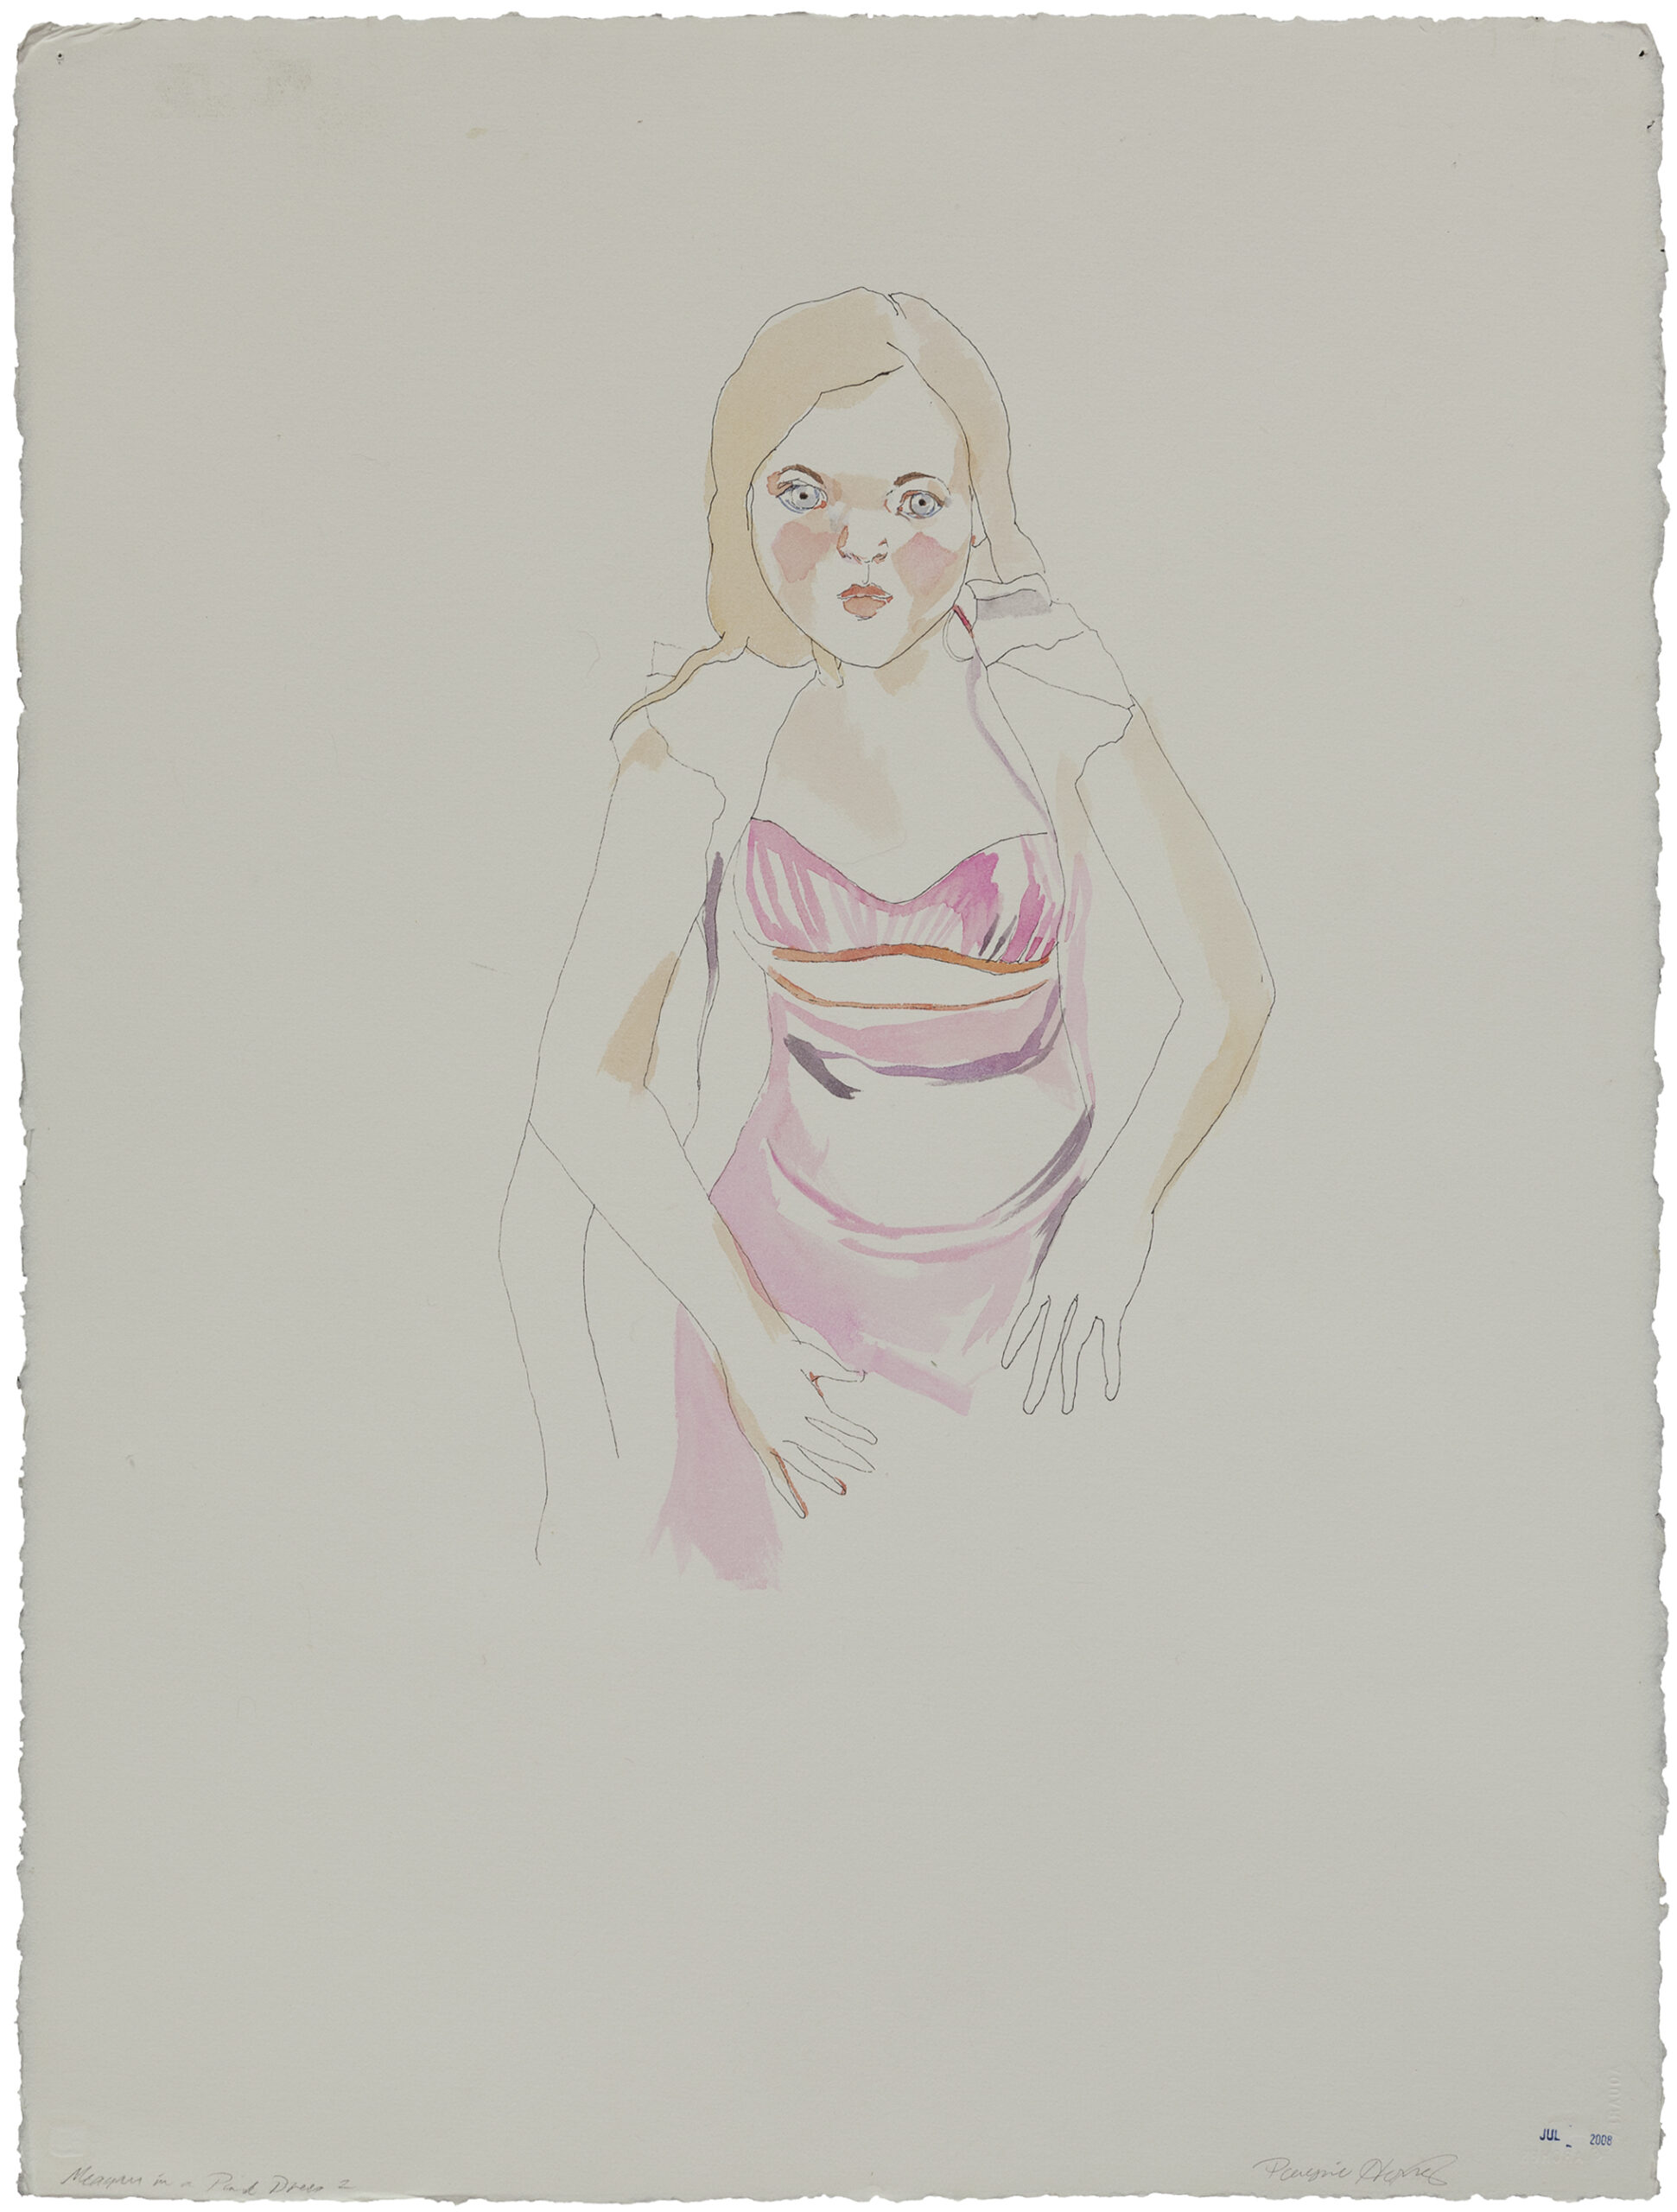 image of Peregrine Honig's - Meagan in a Pink Dress